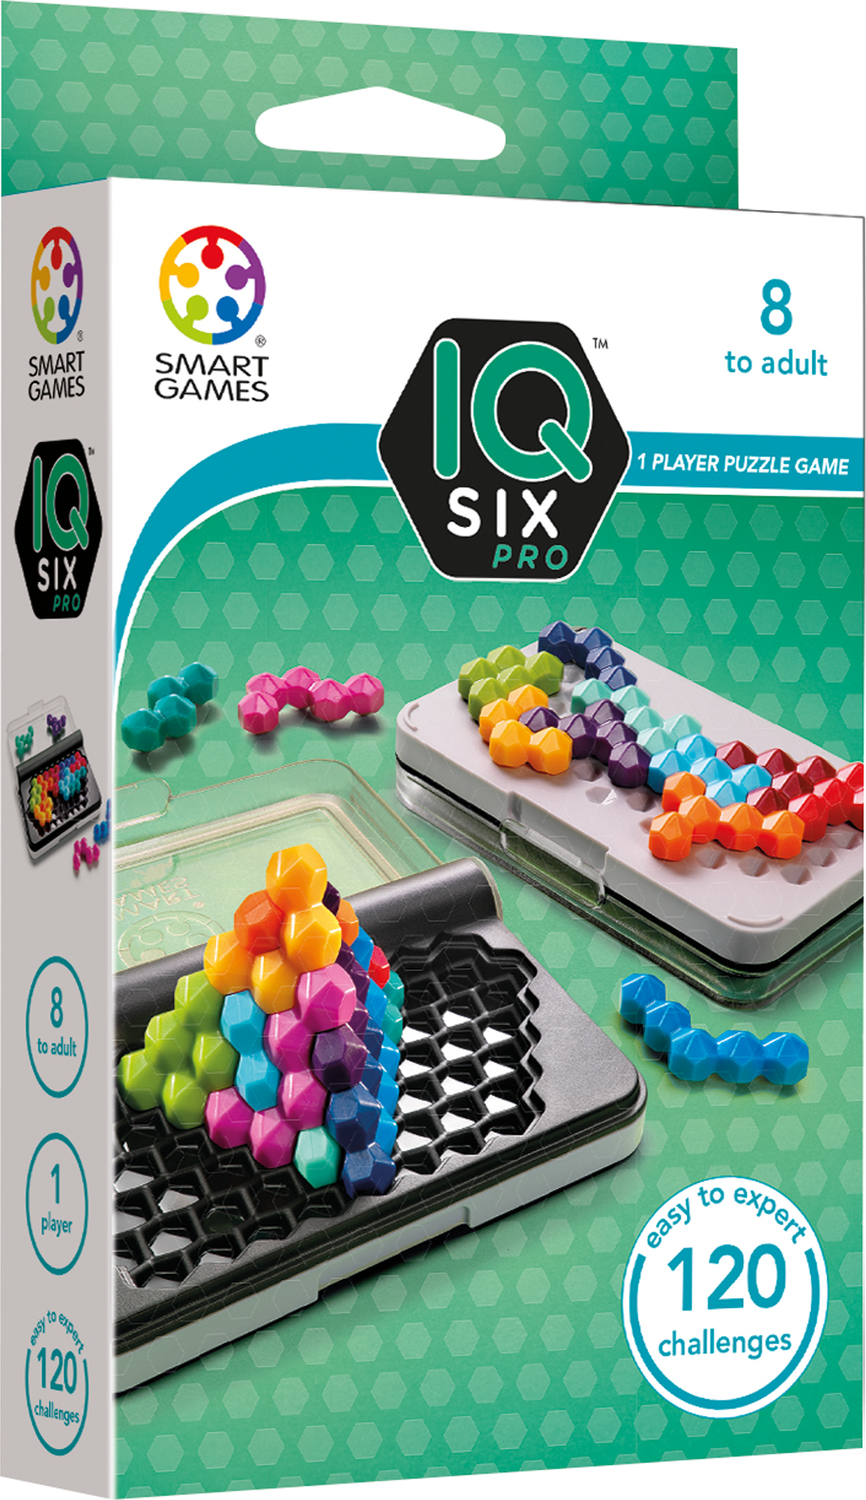 Smart Games IQ Puzzler Pro Compact Board Game Puzzle 120 3D